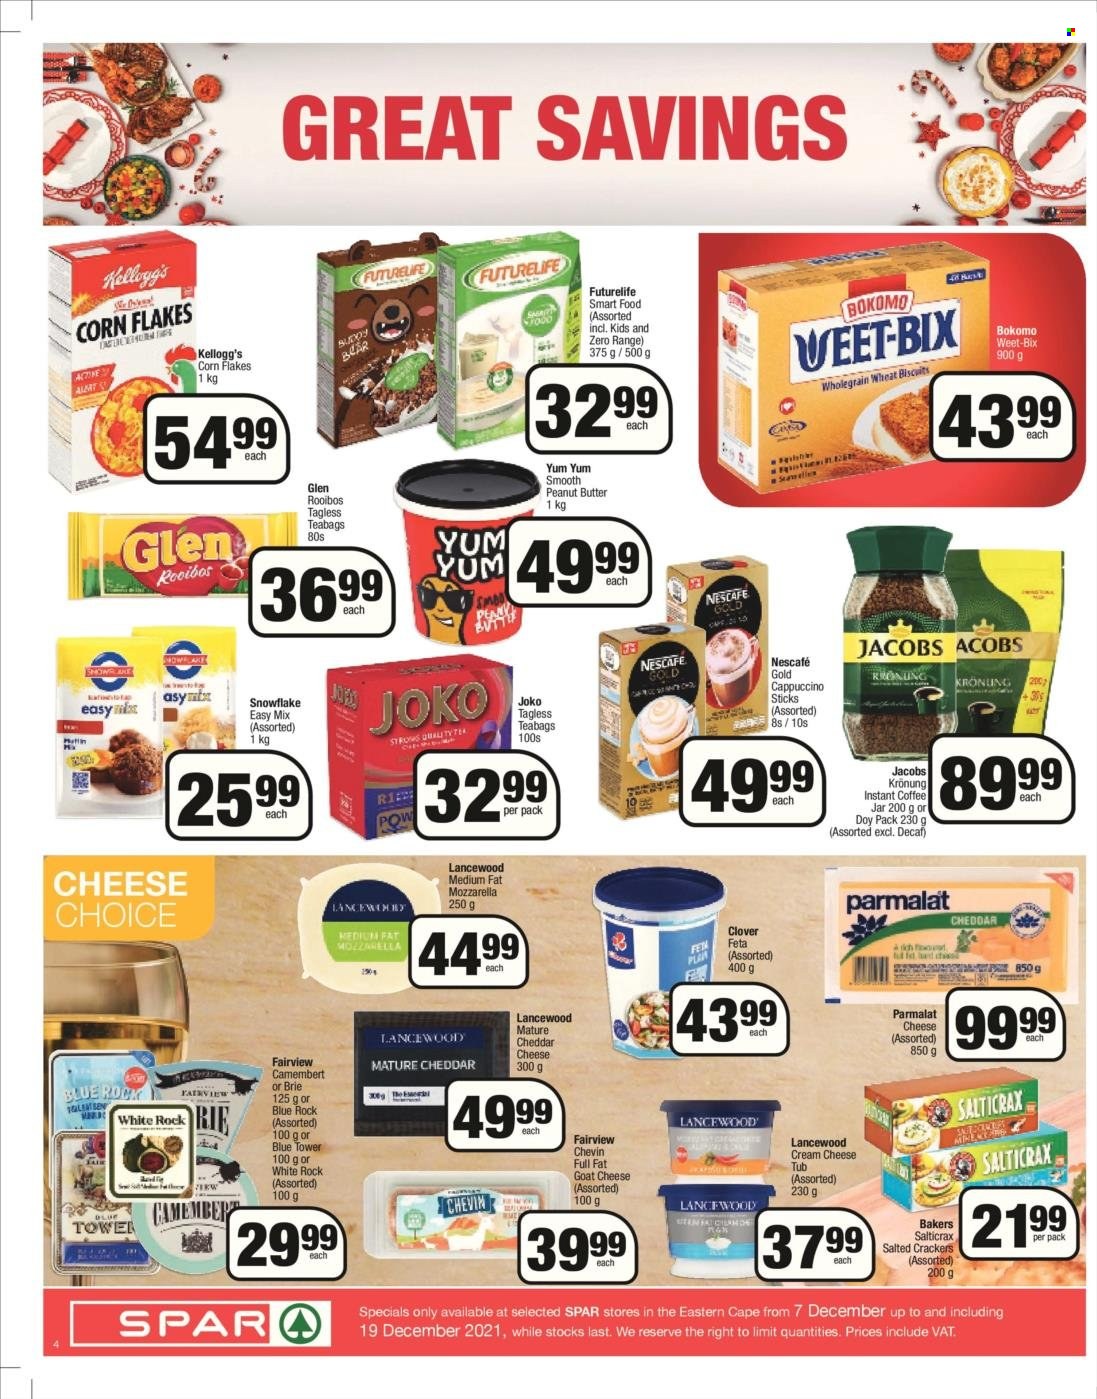 SPAR catalogue  - 07/12/2021 - 19/12/2021 - Sales products - camembert, cream cheese, goat cheese, mozzarella, cheddar, brie cheese, cheese, Lancewood, feta cheese, Clover, Parmalat, crackers, Kellogg's, biscuit, Bakers Salticrax, corn flakes, Weet-Bix, tea bags, rooibos tea, Joko, instant coffee, Jacobs, Nescafé, Jacobs Krönung, Bakers. Page 4.